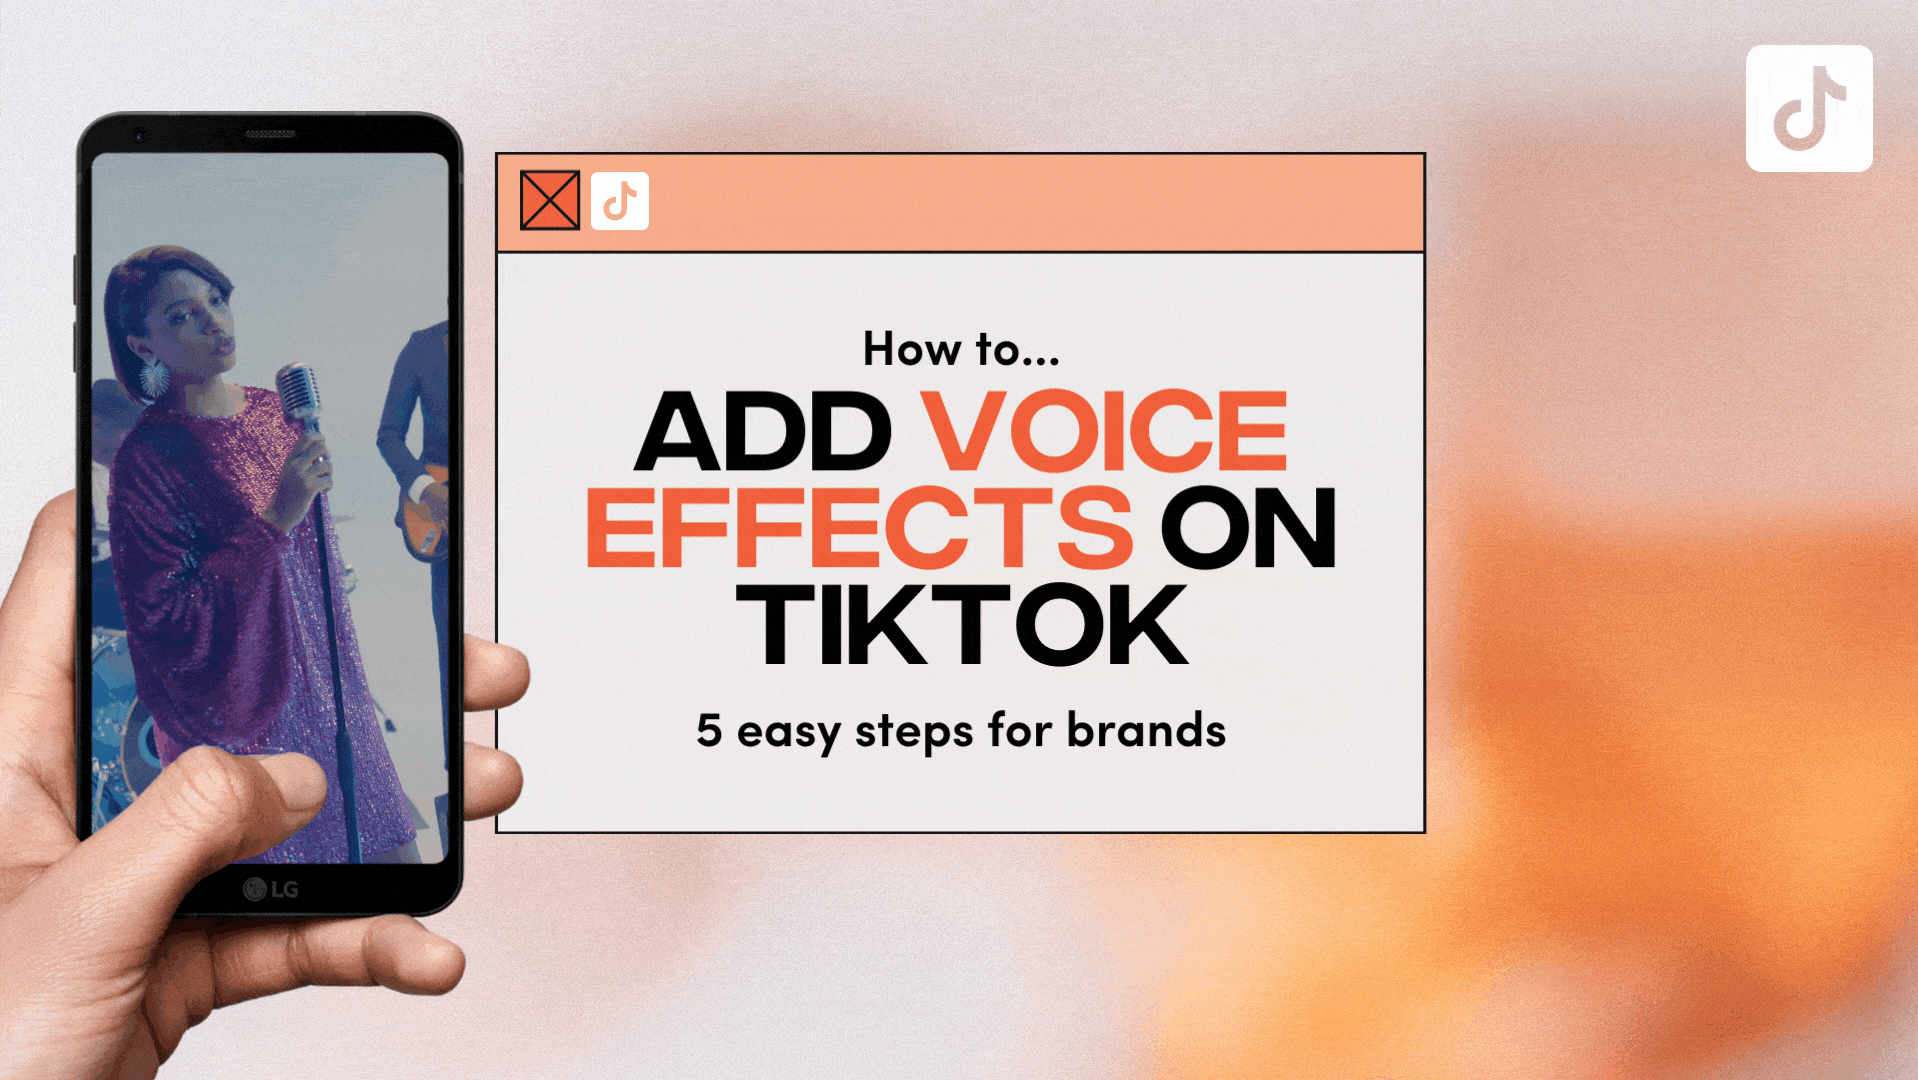 How to Add Voice Effects on TikTok: 5 Easy Steps for Brands